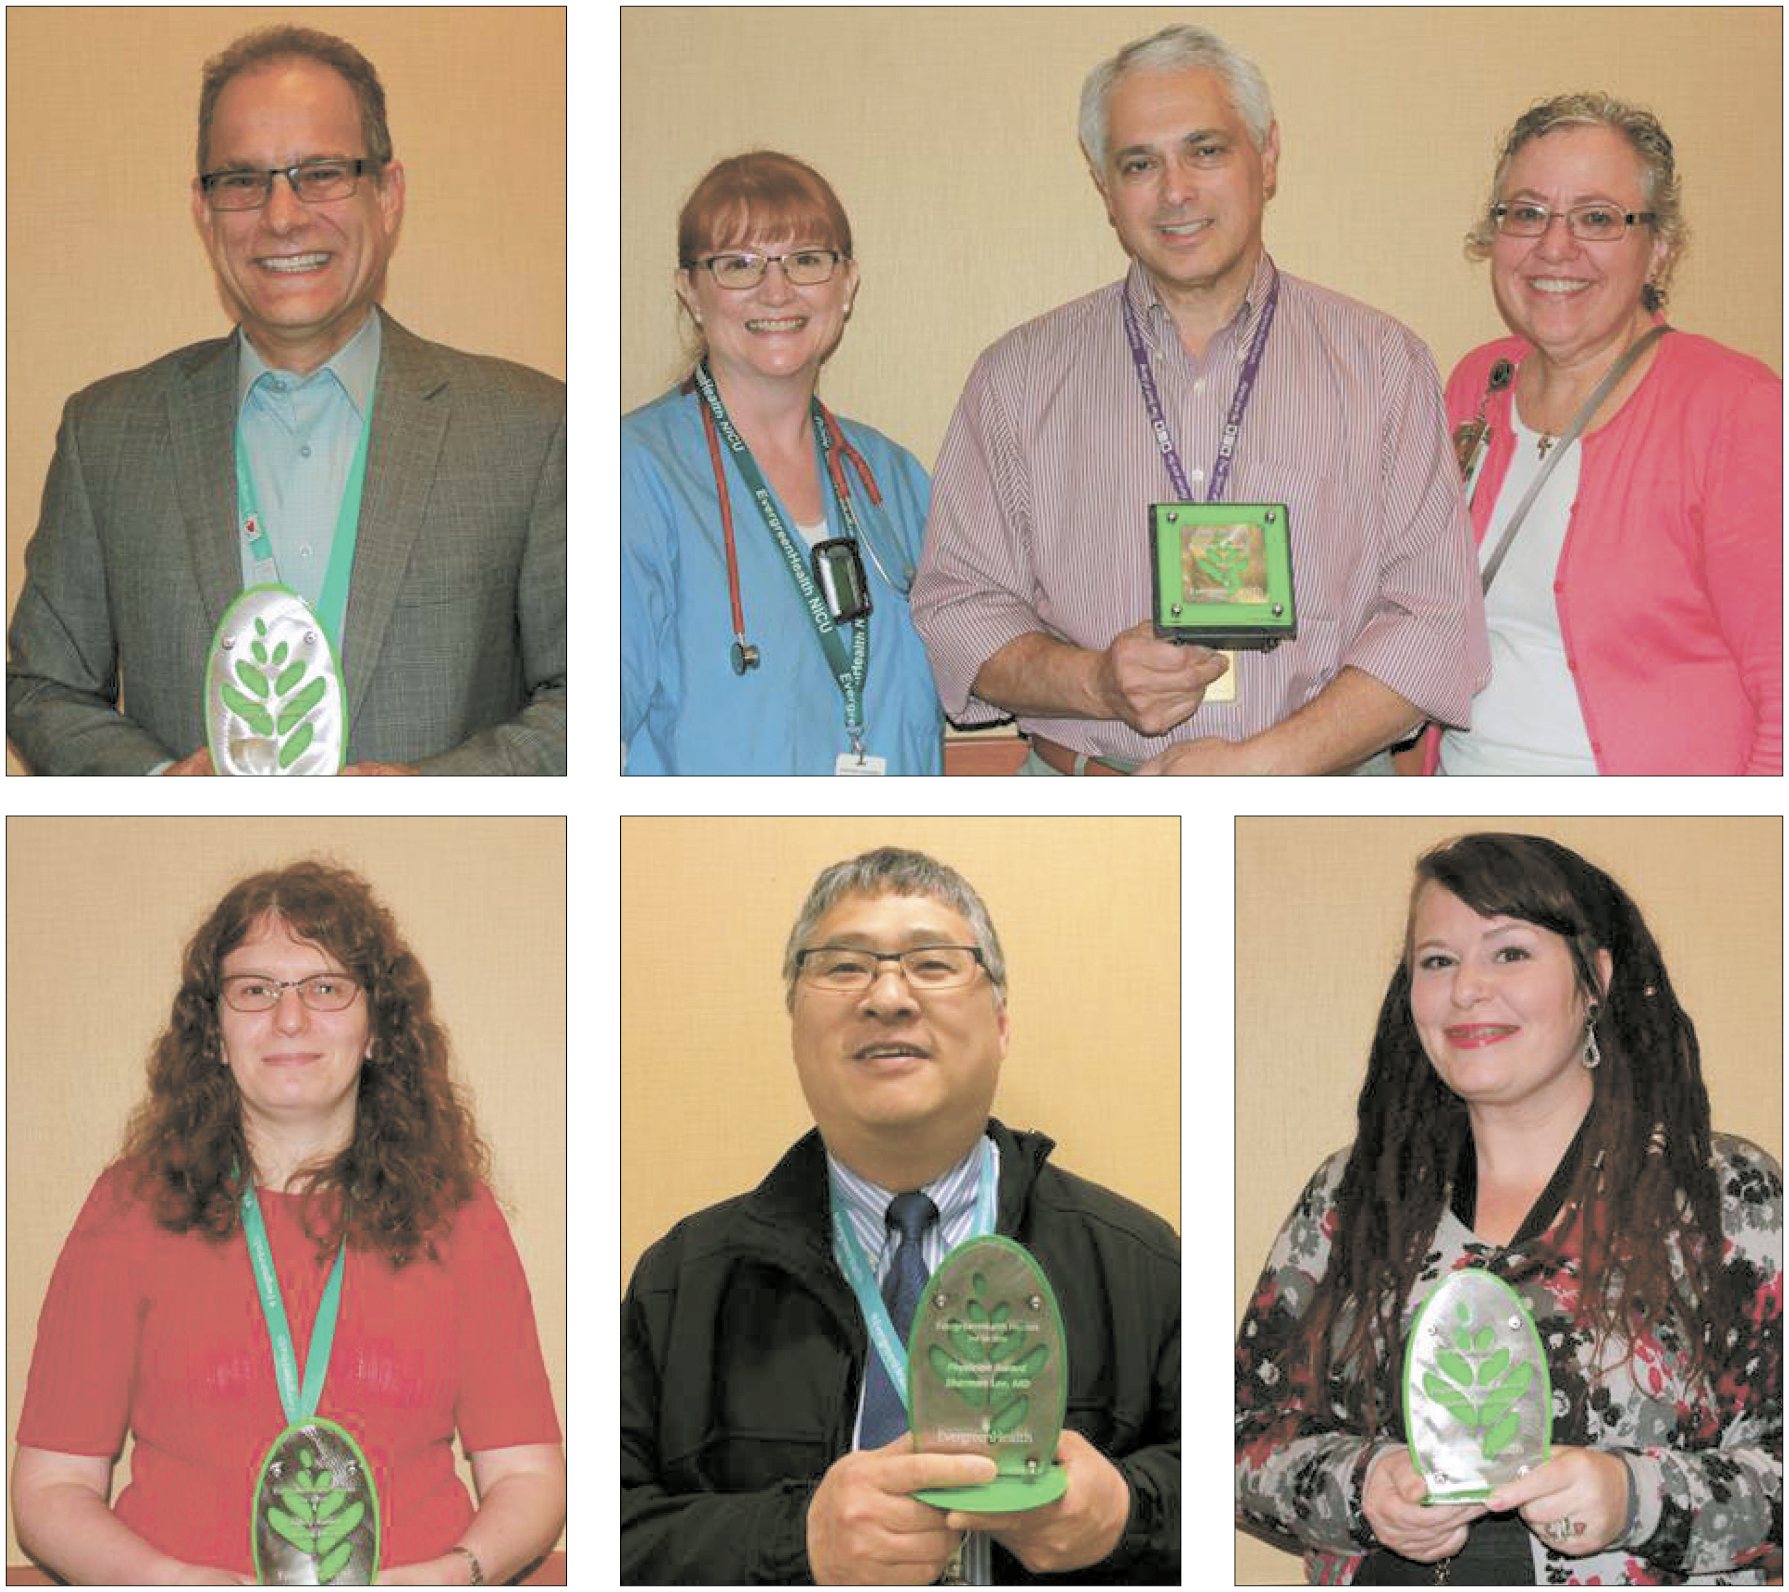 Health Hero award recipients at EvergreenHealth for the second quarter of 2016. Contributed photos